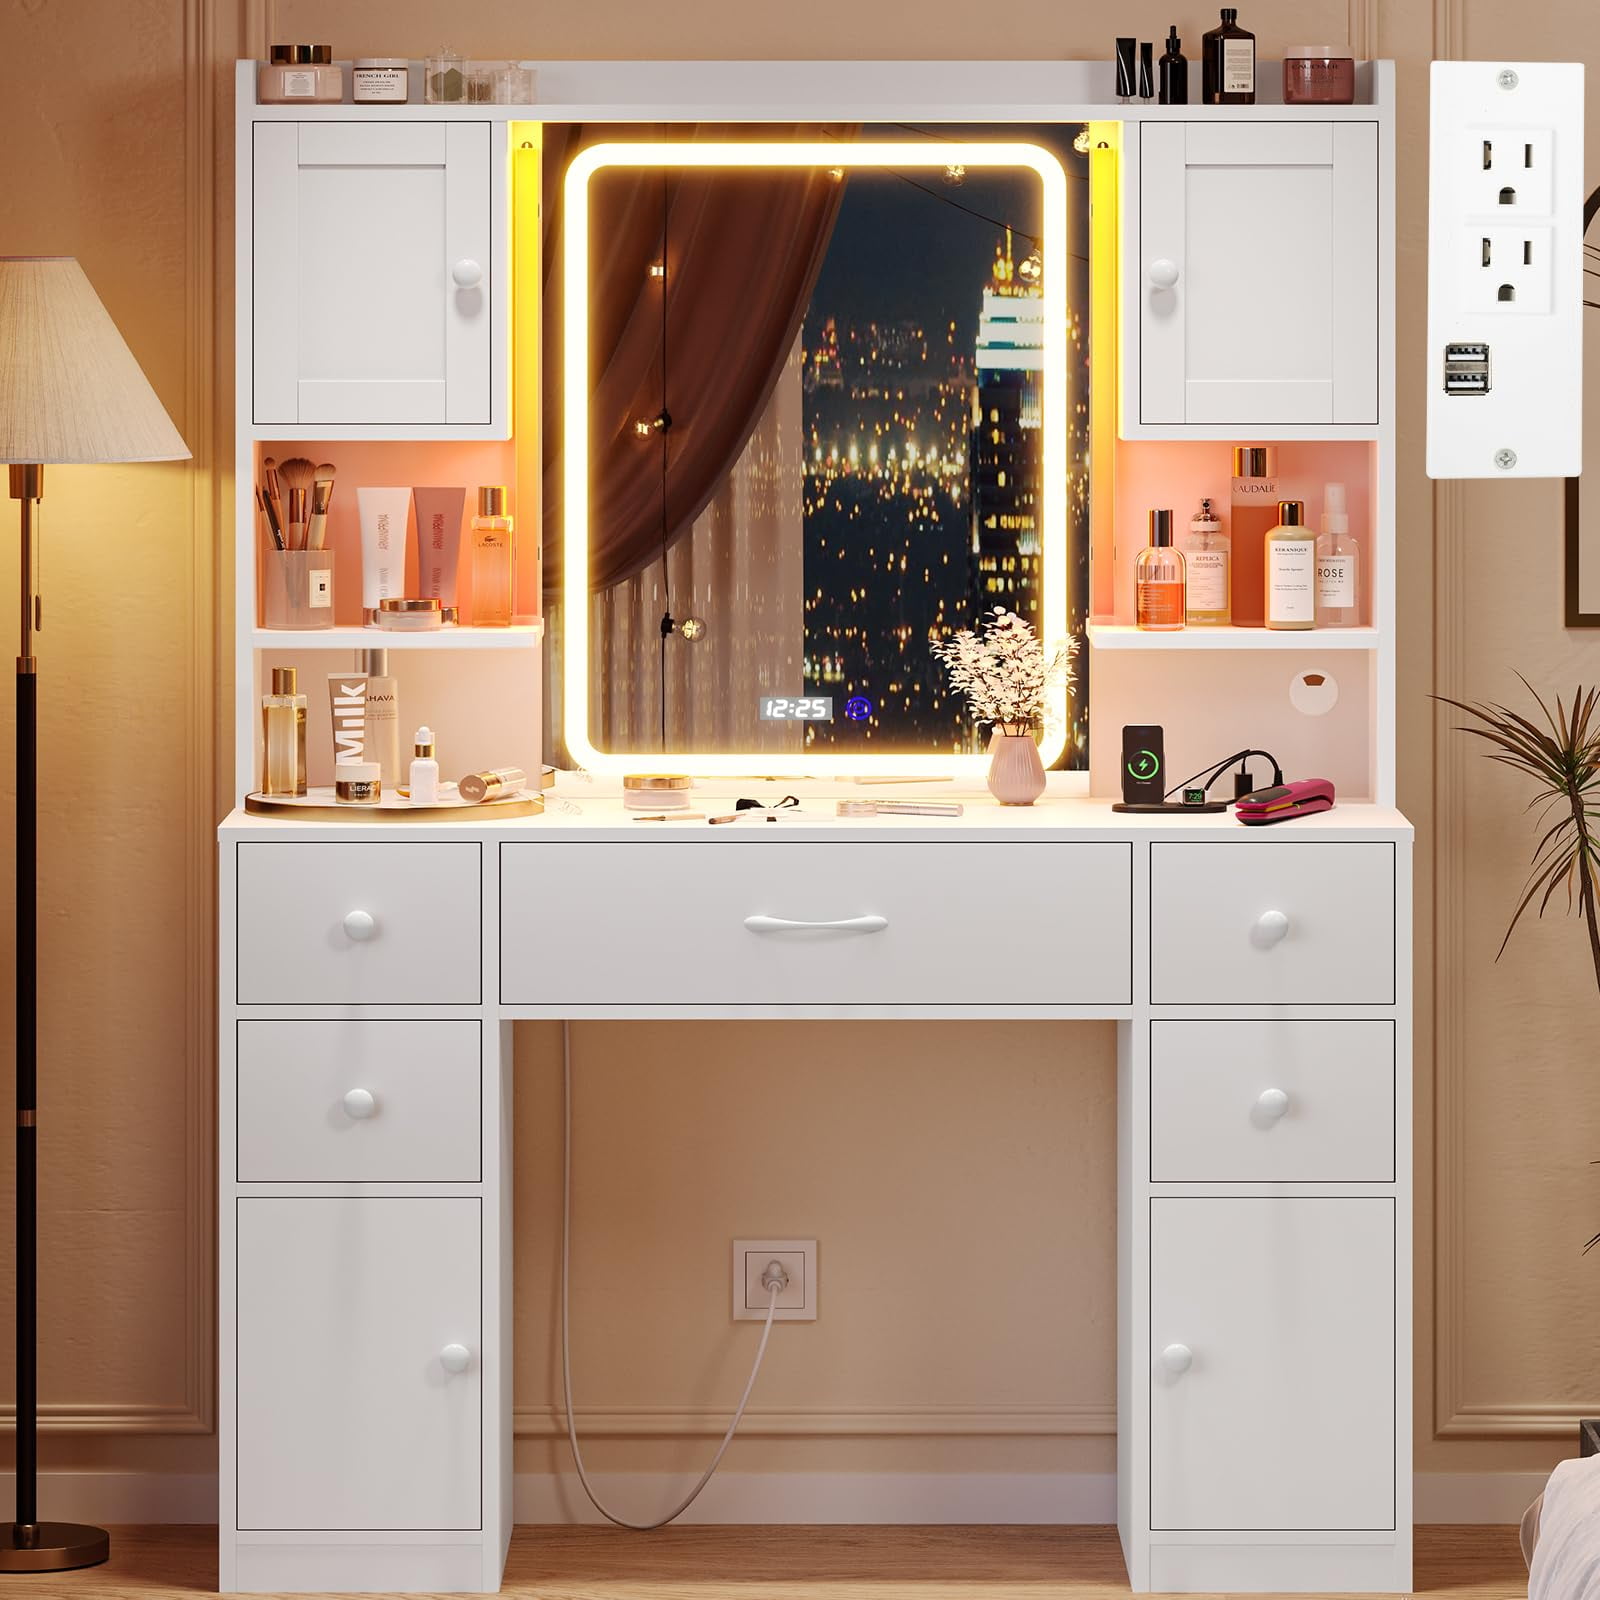 Boahaus Alana Black Vanity Desk Mirror 5 and White Knobs, Lights, with Ball Drawers, Crystal